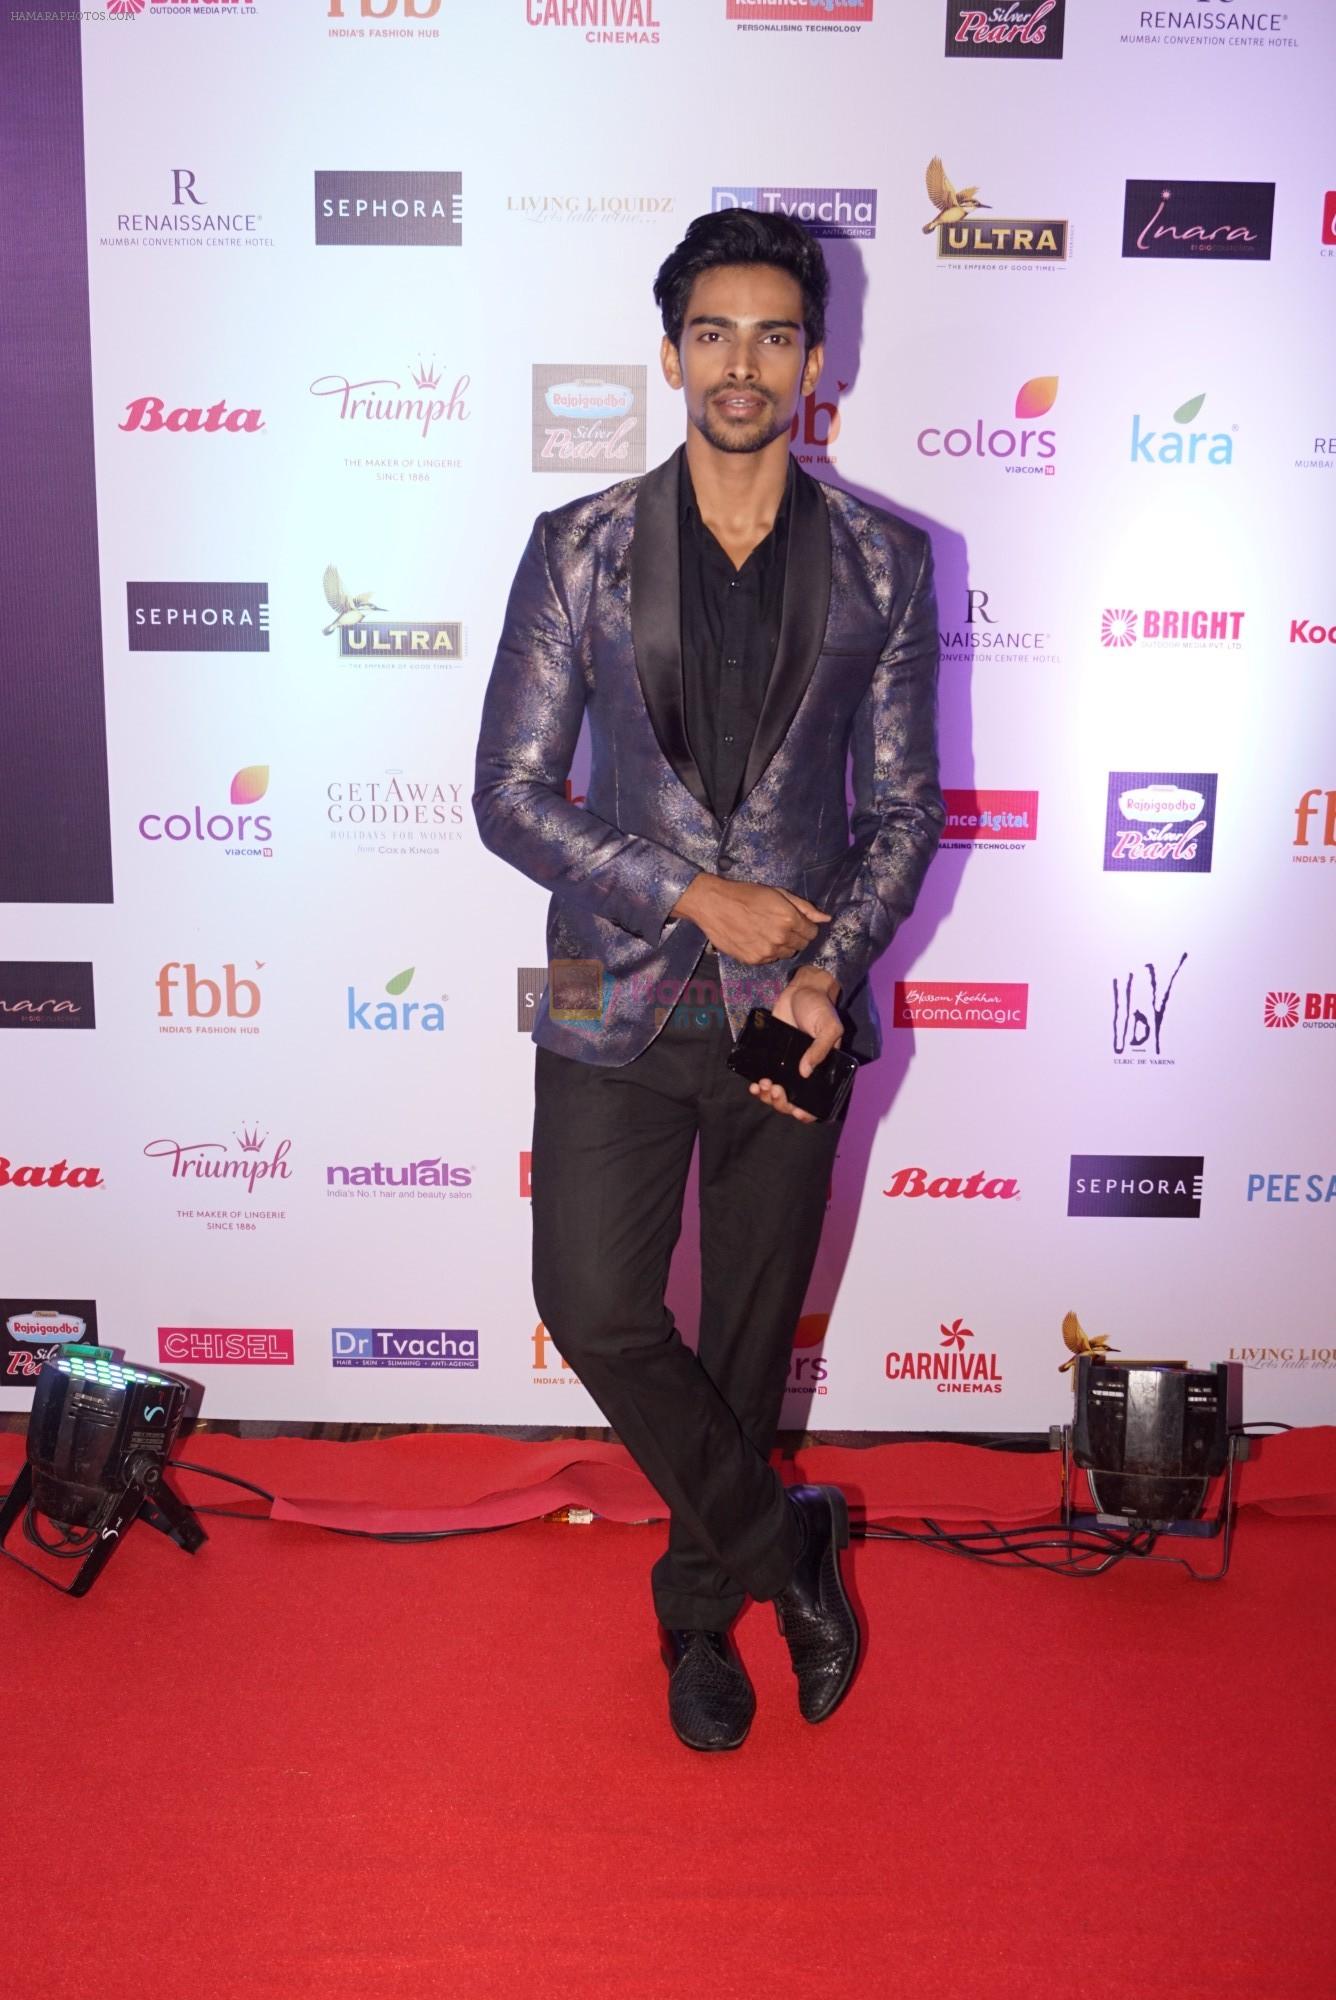 at the Red Carpet Of Miss India Sub-Contest 2018 on 17th June 2018